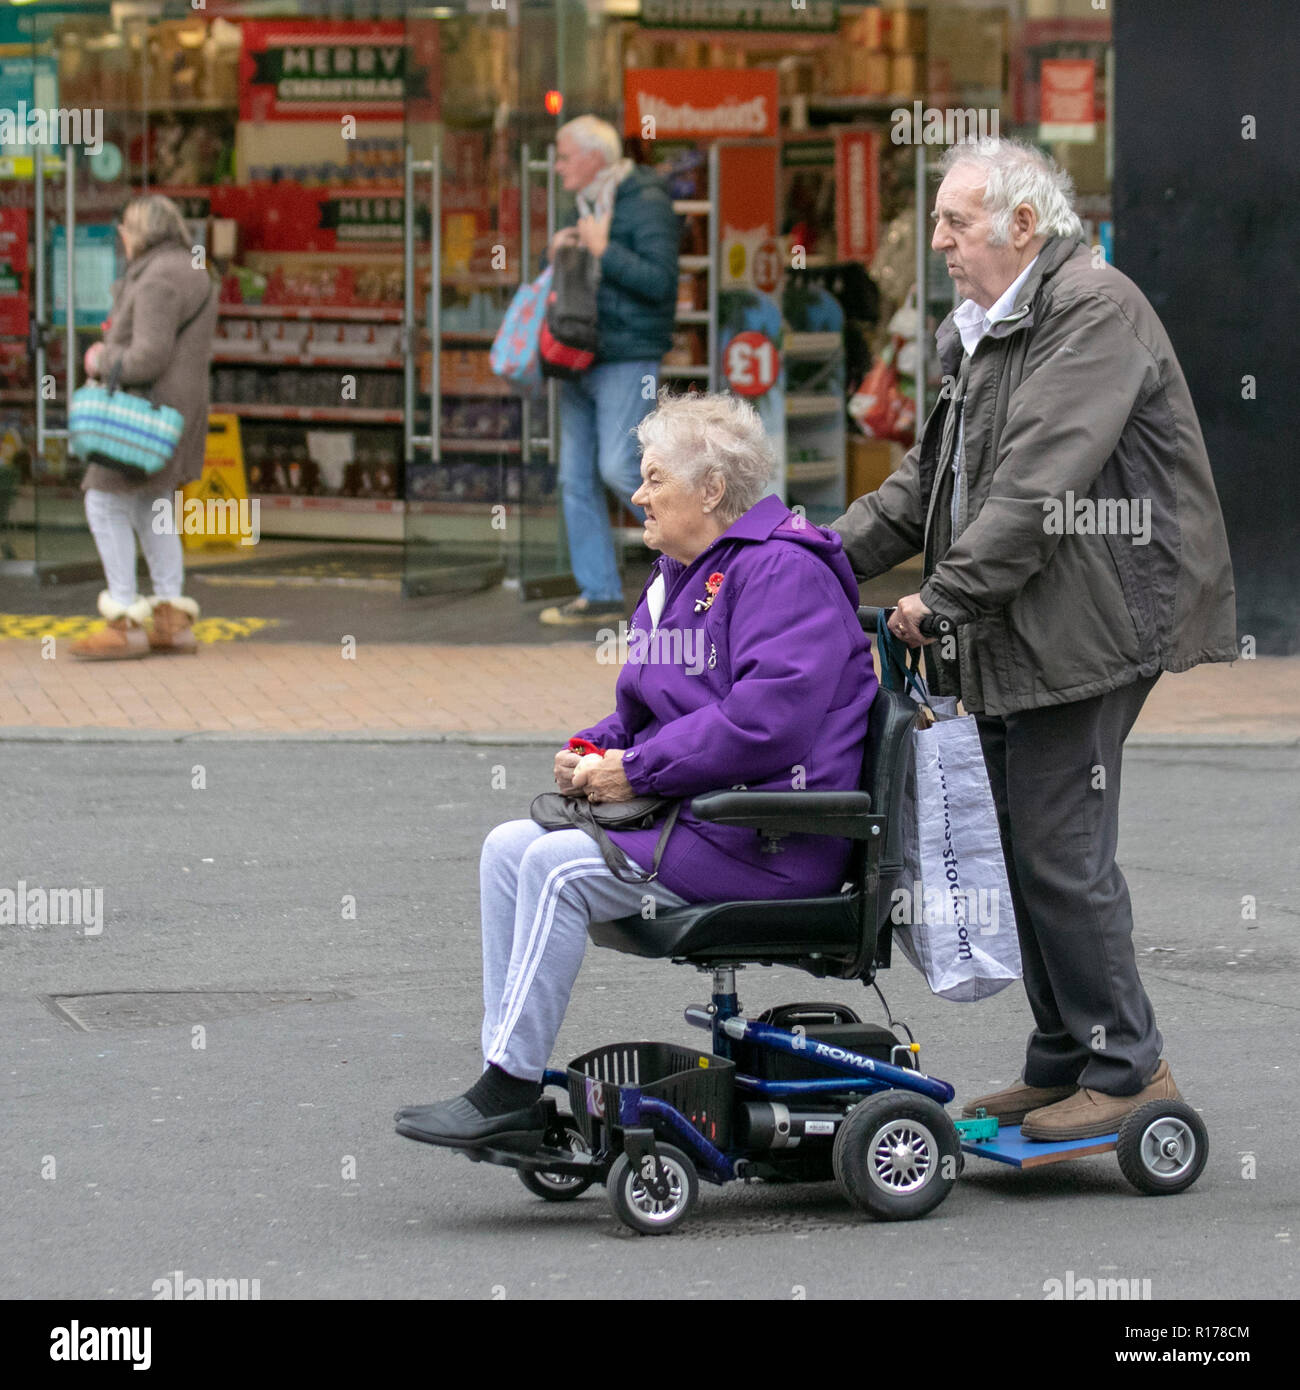 Elderly couple, on Modified battery powered mobility scooter adapted with a trailer carrying two people in Blackpool, UK Stock Photo